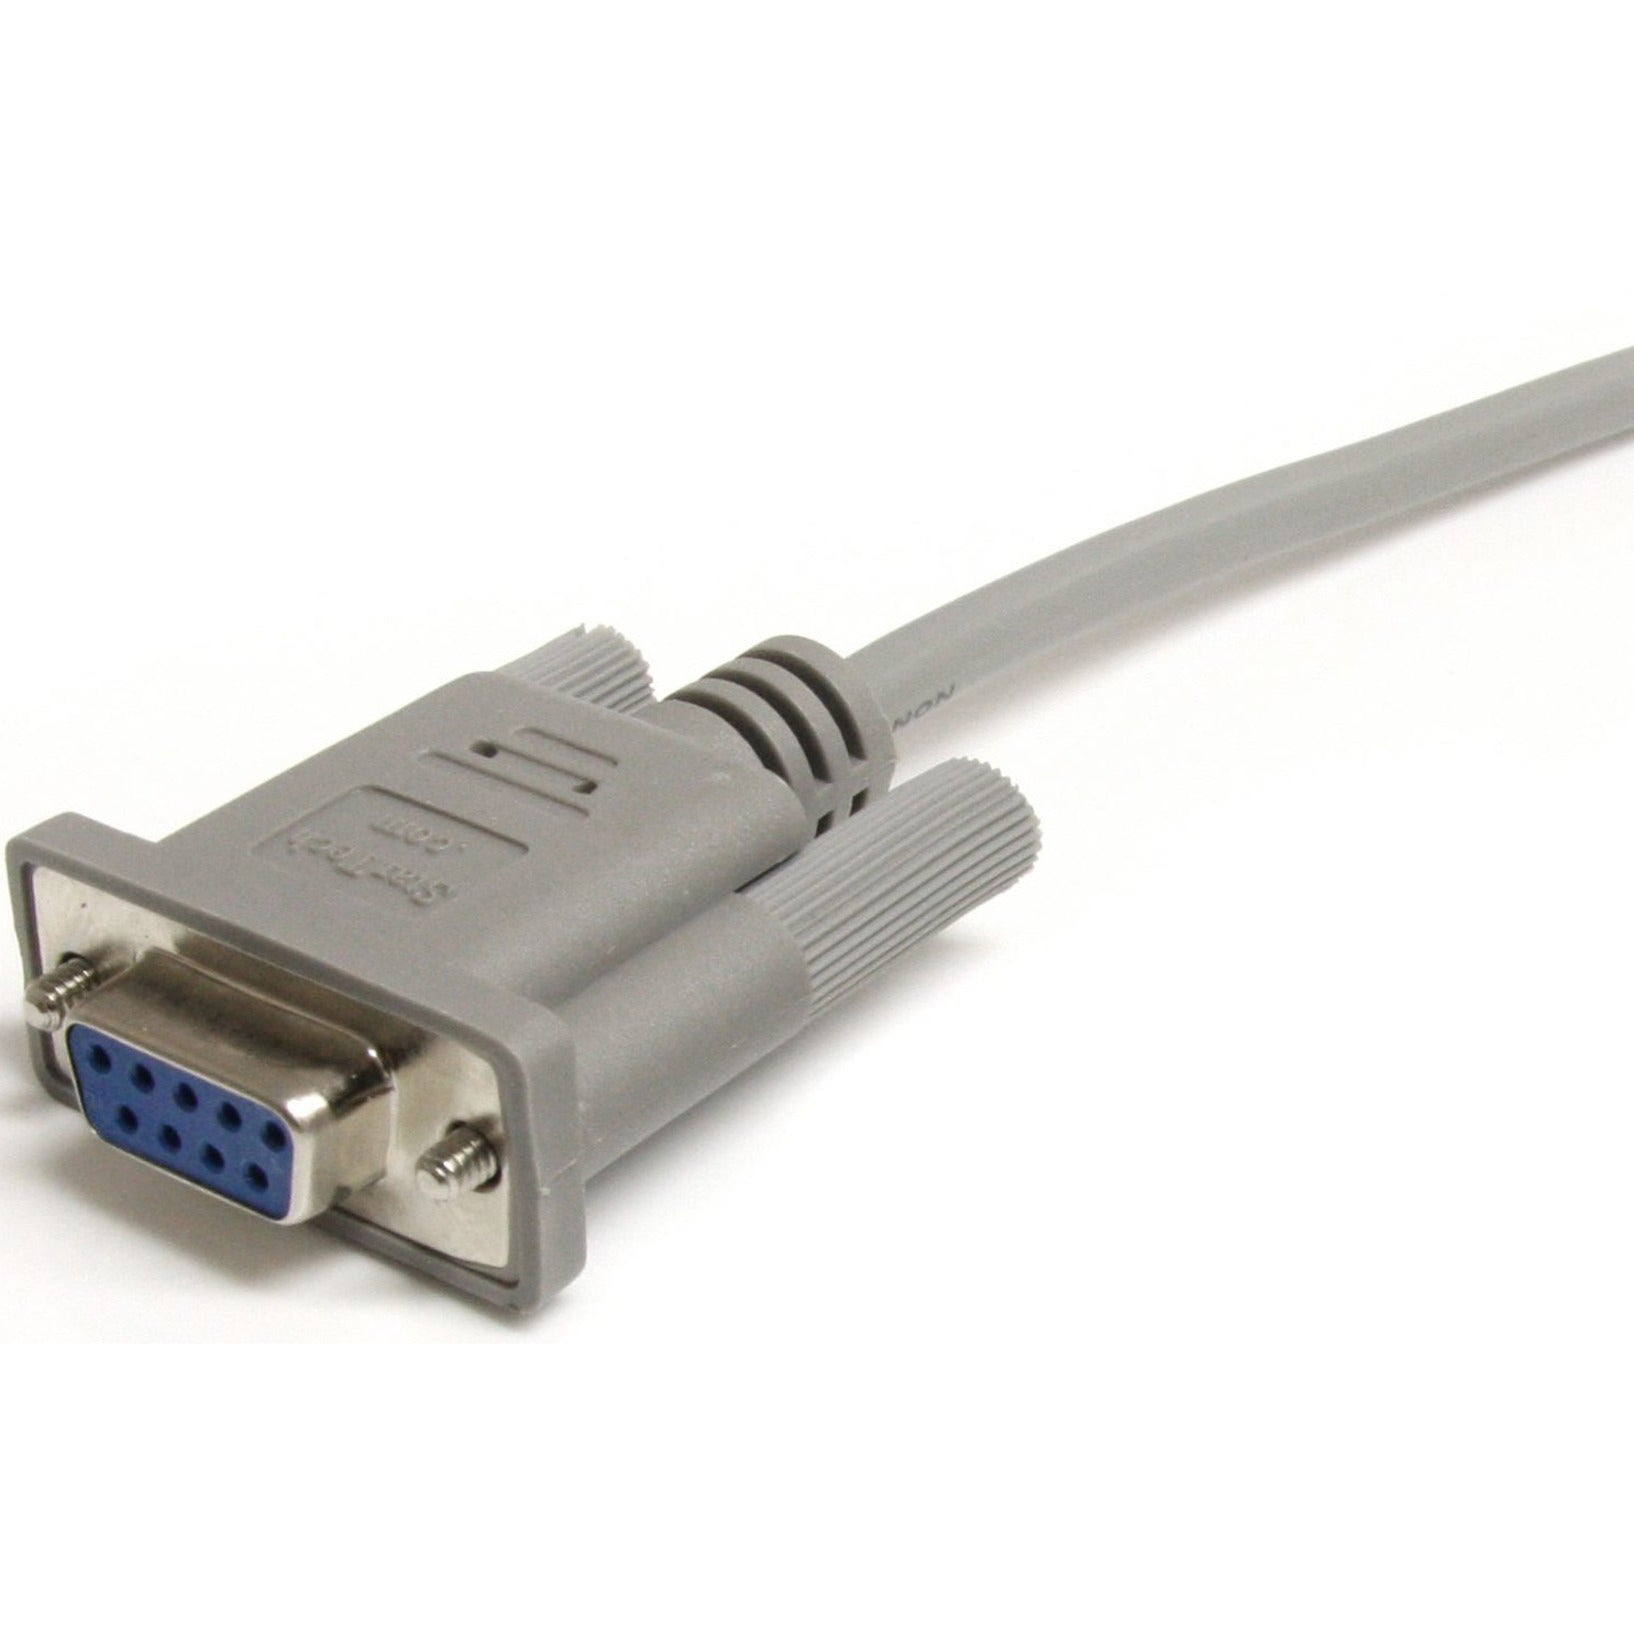 StarTech.com MXT100 Null-Modem Serial Cable, 6 ft, Copper Conductor, Straight-through Extension Cable